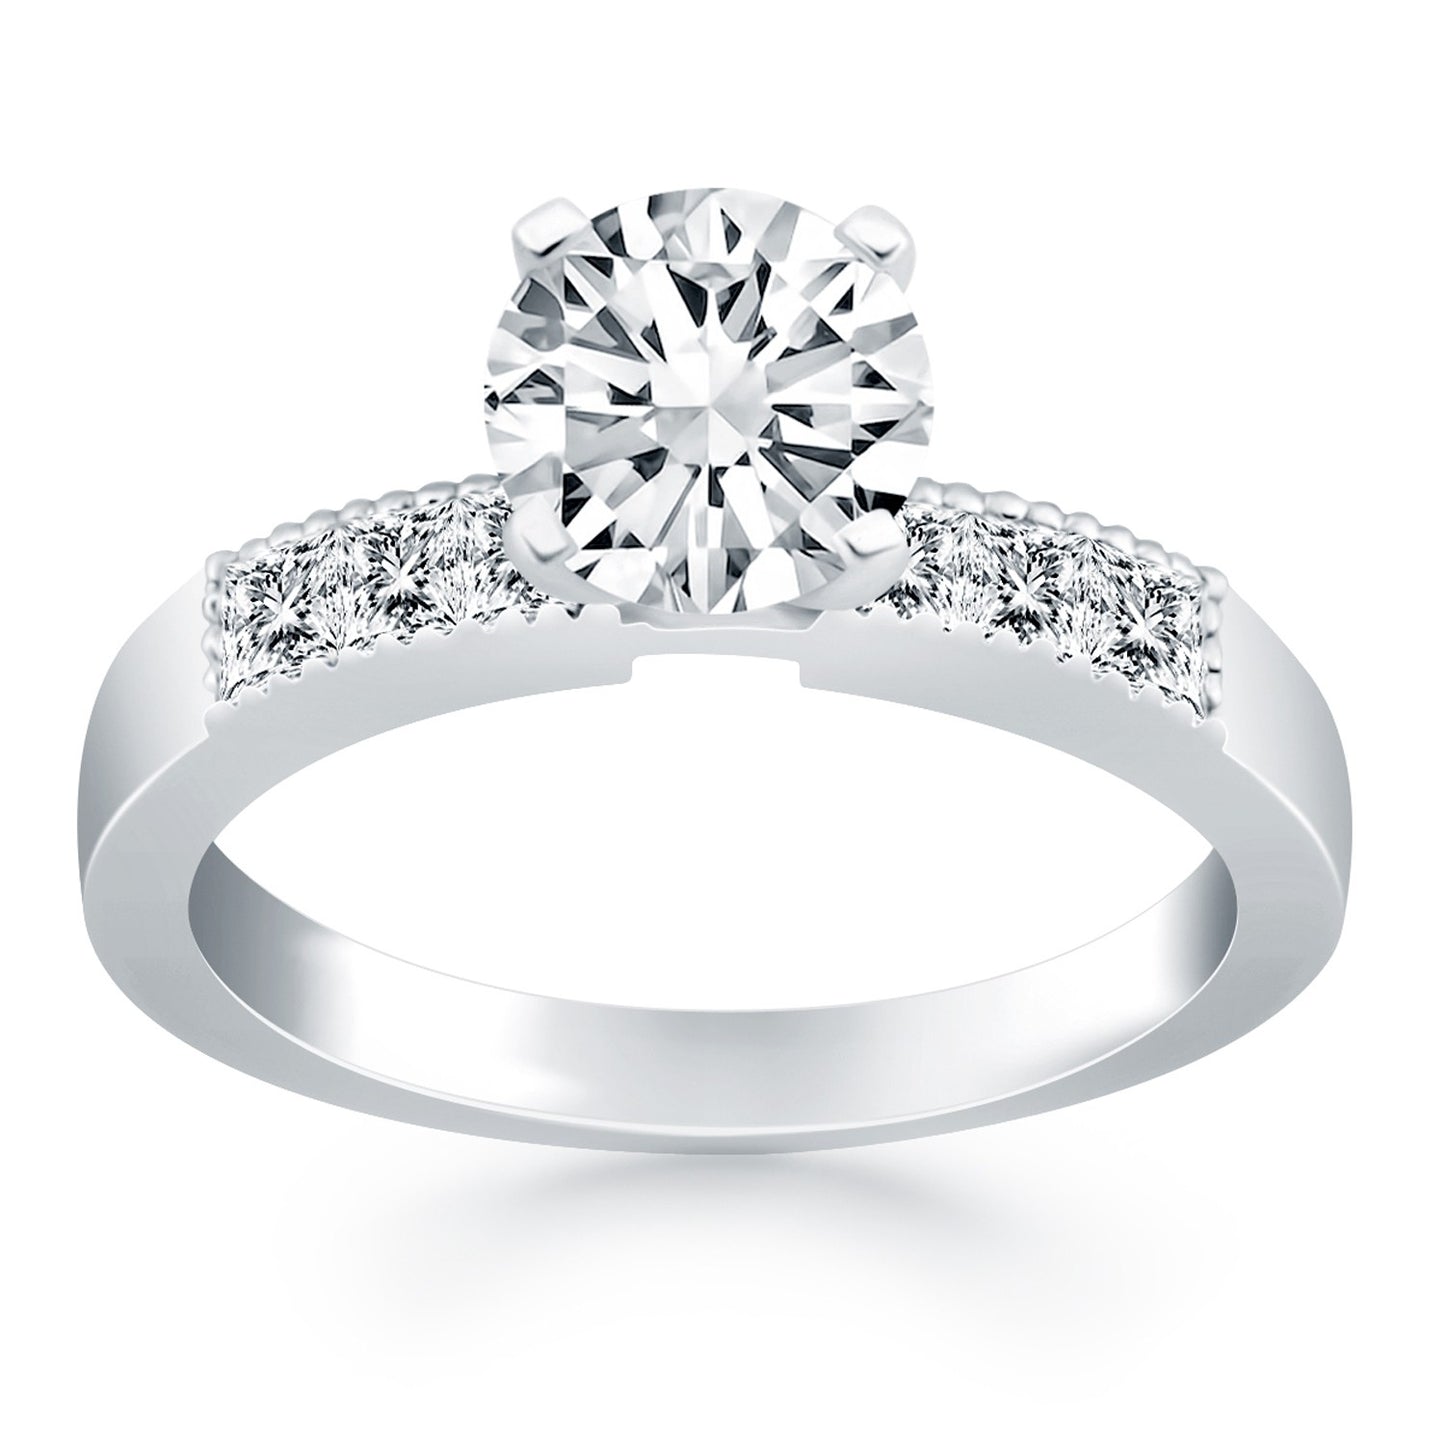 14k White Gold Engagement Ring Mounting with Princess Cut Diamonds